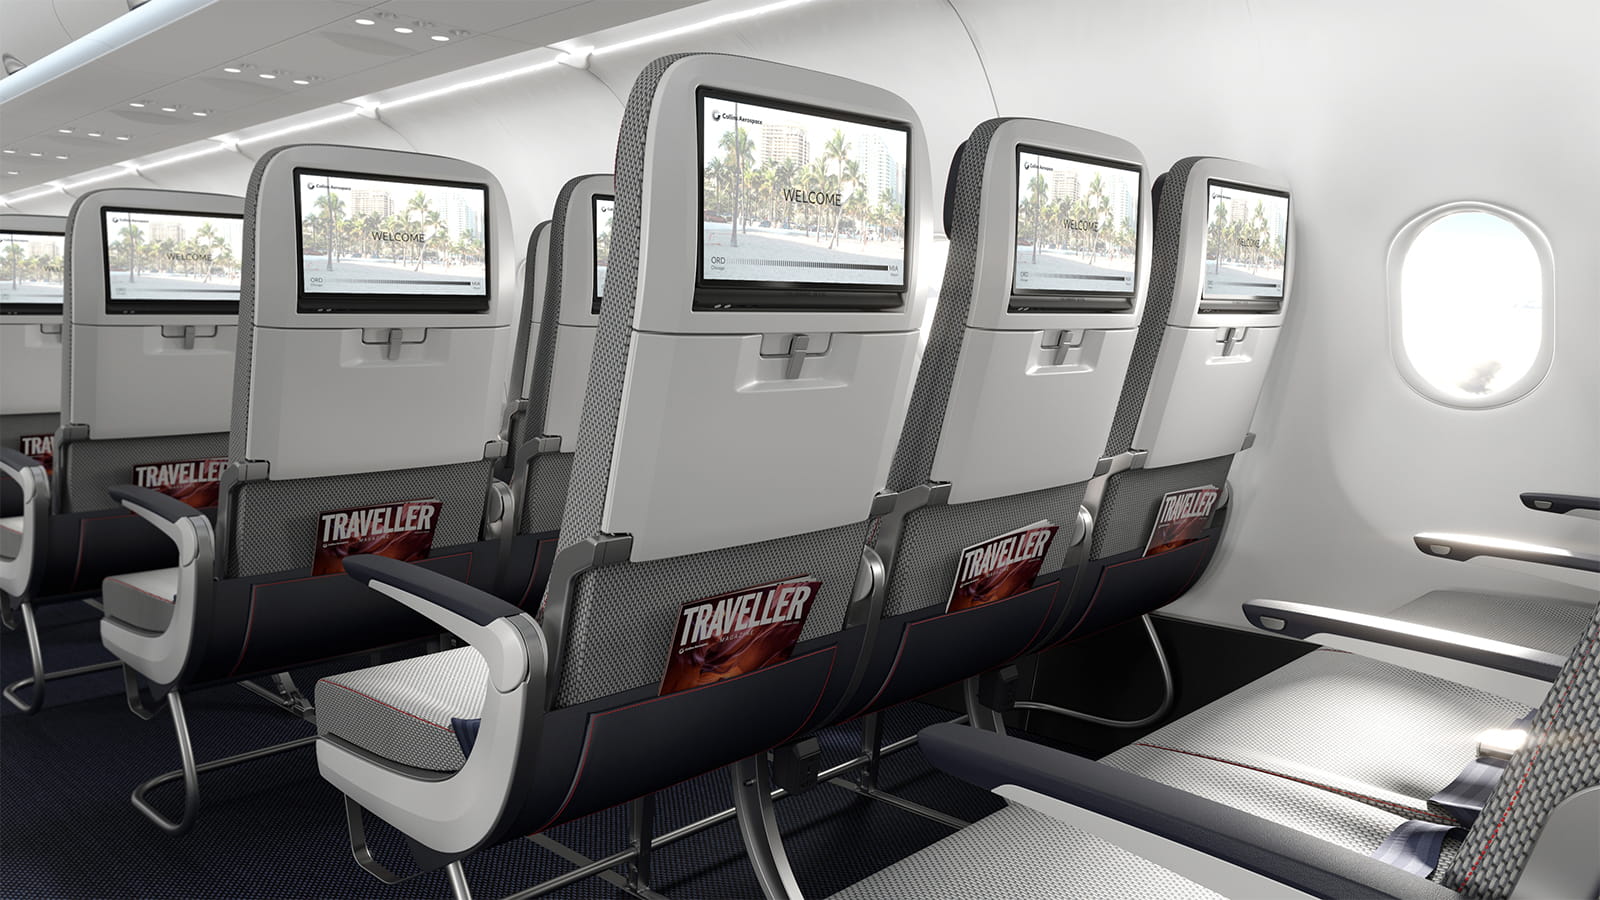 The advanced structural design, engineering and material usage of the Helix™ main cabin seat enhances passenger comfort, increases in-seat stowage and improves product reliability, all while weighing less than similar main cabin seats.